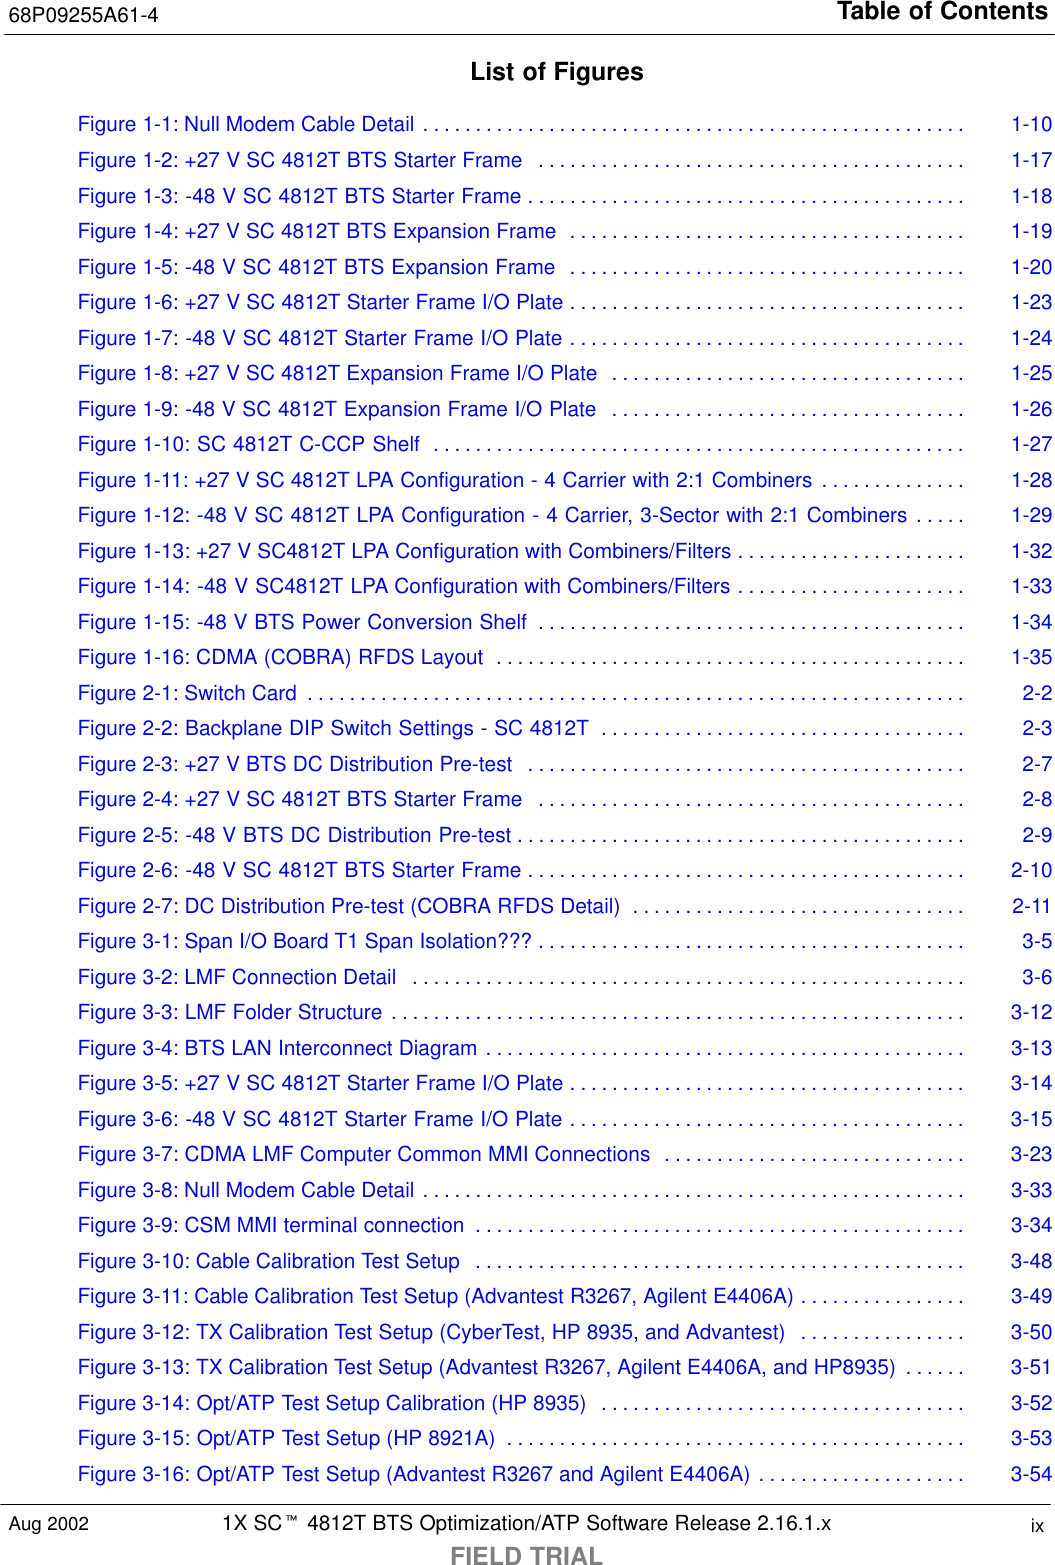 Table of Contents68P09255A61-41X SCt 4812T BTS Optimization/ATP Software Release 2.16.1.xFIELD TRIALixAug 2002List of FiguresFigure 1-1: Null Modem Cable Detail 1-10. . . . . . . . . . . . . . . . . . . . . . . . . . . . . . . . . . . . . . . . . . . . . . . . . . . . Figure 1-2: +27 V SC 4812T BTS Starter Frame 1-17. . . . . . . . . . . . . . . . . . . . . . . . . . . . . . . . . . . . . . . . . Figure 1-3: -48 V SC 4812T BTS Starter Frame 1-18. . . . . . . . . . . . . . . . . . . . . . . . . . . . . . . . . . . . . . . . . . Figure 1-4: +27 V SC 4812T BTS Expansion Frame 1-19. . . . . . . . . . . . . . . . . . . . . . . . . . . . . . . . . . . . . . Figure 1-5: -48 V SC 4812T BTS Expansion Frame 1-20. . . . . . . . . . . . . . . . . . . . . . . . . . . . . . . . . . . . . . Figure 1-6: +27 V SC 4812T Starter Frame I/O Plate 1-23. . . . . . . . . . . . . . . . . . . . . . . . . . . . . . . . . . . . . . Figure 1-7: -48 V SC 4812T Starter Frame I/O Plate 1-24. . . . . . . . . . . . . . . . . . . . . . . . . . . . . . . . . . . . . . Figure 1-8: +27 V SC 4812T Expansion Frame I/O Plate 1-25. . . . . . . . . . . . . . . . . . . . . . . . . . . . . . . . . . Figure 1-9: -48 V SC 4812T Expansion Frame I/O Plate 1-26. . . . . . . . . . . . . . . . . . . . . . . . . . . . . . . . . . Figure 1-10: SC 4812T C-CCP Shelf 1-27. . . . . . . . . . . . . . . . . . . . . . . . . . . . . . . . . . . . . . . . . . . . . . . . . . . Figure 1-11: +27 V SC 4812T LPA Configuration - 4 Carrier with 2:1 Combiners 1-28. . . . . . . . . . . . . . Figure 1-12: -48 V SC 4812T LPA Configuration - 4 Carrier, 3-Sector with 2:1 Combiners 1-29. . . . . Figure 1-13: +27 V SC4812T LPA Configuration with Combiners/Filters 1-32. . . . . . . . . . . . . . . . . . . . . . Figure 1-14: -48 V SC4812T LPA Configuration with Combiners/Filters 1-33. . . . . . . . . . . . . . . . . . . . . . Figure 1-15: -48 V BTS Power Conversion Shelf 1-34. . . . . . . . . . . . . . . . . . . . . . . . . . . . . . . . . . . . . . . . . Figure 1-16: CDMA (COBRA) RFDS Layout 1-35. . . . . . . . . . . . . . . . . . . . . . . . . . . . . . . . . . . . . . . . . . . . . Figure 2-1: Switch Card 2-2. . . . . . . . . . . . . . . . . . . . . . . . . . . . . . . . . . . . . . . . . . . . . . . . . . . . . . . . . . . . . . . Figure 2-2: Backplane DIP Switch Settings - SC 4812T 2-3. . . . . . . . . . . . . . . . . . . . . . . . . . . . . . . . . . . Figure 2-3: +27 V BTS DC Distribution Pre-test 2-7. . . . . . . . . . . . . . . . . . . . . . . . . . . . . . . . . . . . . . . . . . Figure 2-4: +27 V SC 4812T BTS Starter Frame 2-8. . . . . . . . . . . . . . . . . . . . . . . . . . . . . . . . . . . . . . . . . Figure 2-5: -48 V BTS DC Distribution Pre-test 2-9. . . . . . . . . . . . . . . . . . . . . . . . . . . . . . . . . . . . . . . . . . . Figure 2-6: -48 V SC 4812T BTS Starter Frame 2-10. . . . . . . . . . . . . . . . . . . . . . . . . . . . . . . . . . . . . . . . . . Figure 2-7: DC Distribution Pre-test (COBRA RFDS Detail) 2-11. . . . . . . . . . . . . . . . . . . . . . . . . . . . . . . . Figure 3-1: Span I/O Board T1 Span Isolation??? 3-5. . . . . . . . . . . . . . . . . . . . . . . . . . . . . . . . . . . . . . . . . Figure 3-2: LMF Connection Detail 3-6. . . . . . . . . . . . . . . . . . . . . . . . . . . . . . . . . . . . . . . . . . . . . . . . . . . . . Figure 3-3: LMF Folder Structure 3-12. . . . . . . . . . . . . . . . . . . . . . . . . . . . . . . . . . . . . . . . . . . . . . . . . . . . . . . Figure 3-4: BTS LAN Interconnect Diagram 3-13. . . . . . . . . . . . . . . . . . . . . . . . . . . . . . . . . . . . . . . . . . . . . . Figure 3-5: +27 V SC 4812T Starter Frame I/O Plate 3-14. . . . . . . . . . . . . . . . . . . . . . . . . . . . . . . . . . . . . . Figure 3-6: -48 V SC 4812T Starter Frame I/O Plate 3-15. . . . . . . . . . . . . . . . . . . . . . . . . . . . . . . . . . . . . . Figure 3-7: CDMA LMF Computer Common MMI Connections 3-23. . . . . . . . . . . . . . . . . . . . . . . . . . . . . Figure 3-8: Null Modem Cable Detail 3-33. . . . . . . . . . . . . . . . . . . . . . . . . . . . . . . . . . . . . . . . . . . . . . . . . . . . Figure 3-9: CSM MMI terminal connection 3-34. . . . . . . . . . . . . . . . . . . . . . . . . . . . . . . . . . . . . . . . . . . . . . . Figure 3-10: Cable Calibration Test Setup 3-48. . . . . . . . . . . . . . . . . . . . . . . . . . . . . . . . . . . . . . . . . . . . . . . Figure 3-11: Cable Calibration Test Setup (Advantest R3267, Agilent E4406A) 3-49. . . . . . . . . . . . . . . . Figure 3-12: TX Calibration Test Setup (CyberTest, HP 8935, and Advantest) 3-50. . . . . . . . . . . . . . . . Figure 3-13: TX Calibration Test Setup (Advantest R3267, Agilent E4406A, and HP8935) 3-51. . . . . . Figure 3-14: Opt/ATP Test Setup Calibration (HP 8935) 3-52. . . . . . . . . . . . . . . . . . . . . . . . . . . . . . . . . . . Figure 3-15: Opt/ATP Test Setup (HP 8921A) 3-53. . . . . . . . . . . . . . . . . . . . . . . . . . . . . . . . . . . . . . . . . . . . Figure 3-16: Opt/ATP Test Setup (Advantest R3267 and Agilent E4406A) 3-54. . . . . . . . . . . . . . . . . . . . 